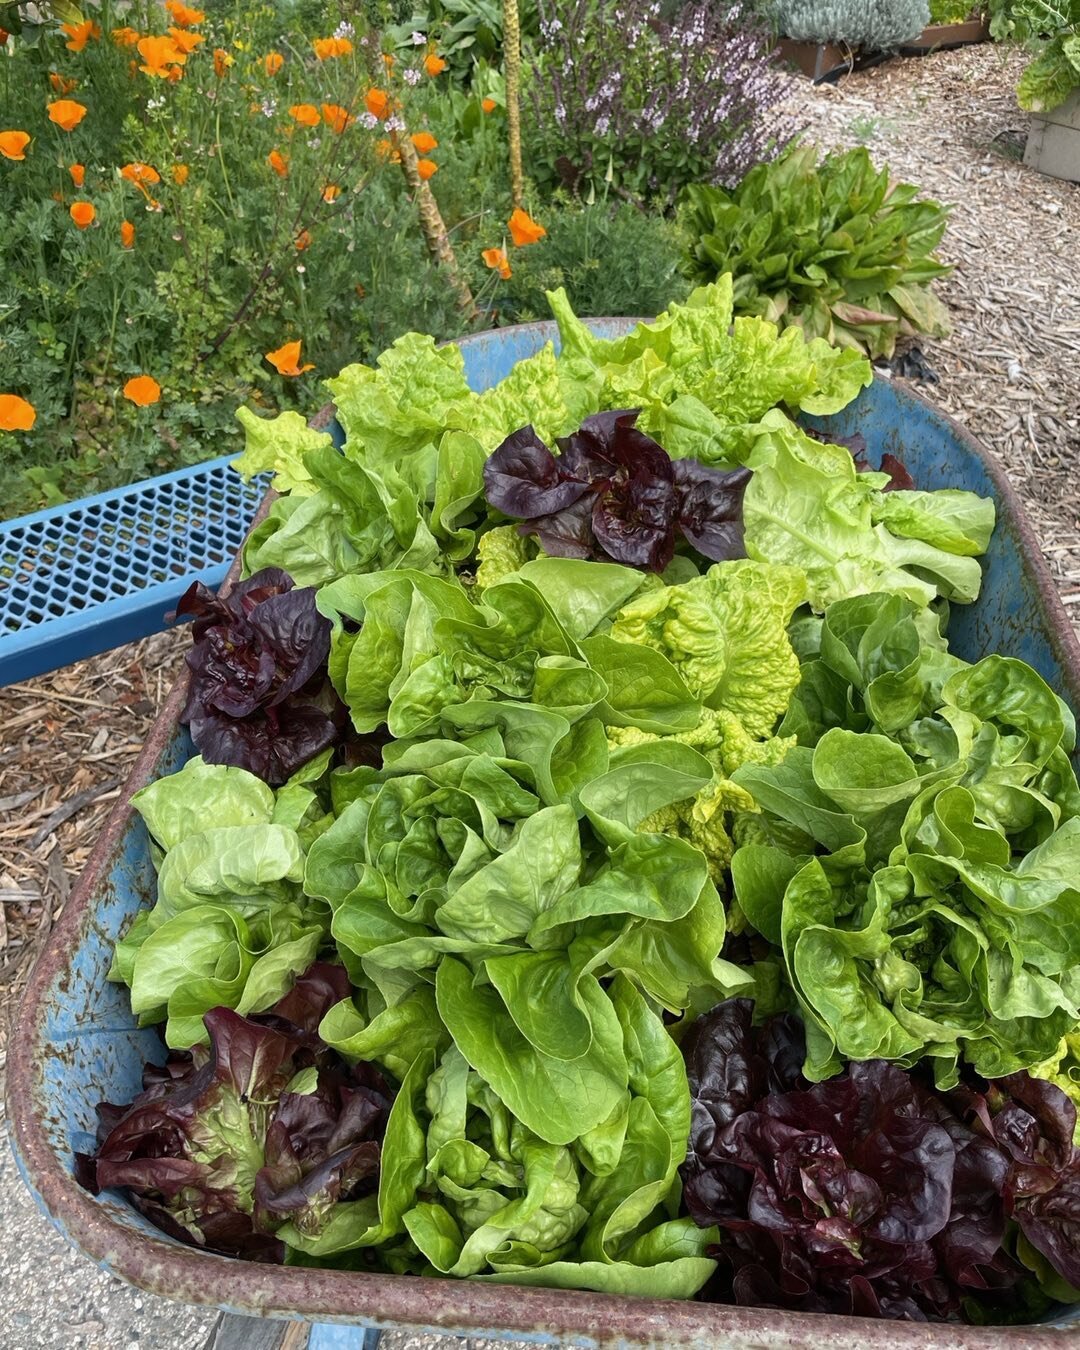 50 of the 100+ lettuces Patty and I harvested this week for the Mark Twain Food Bank.